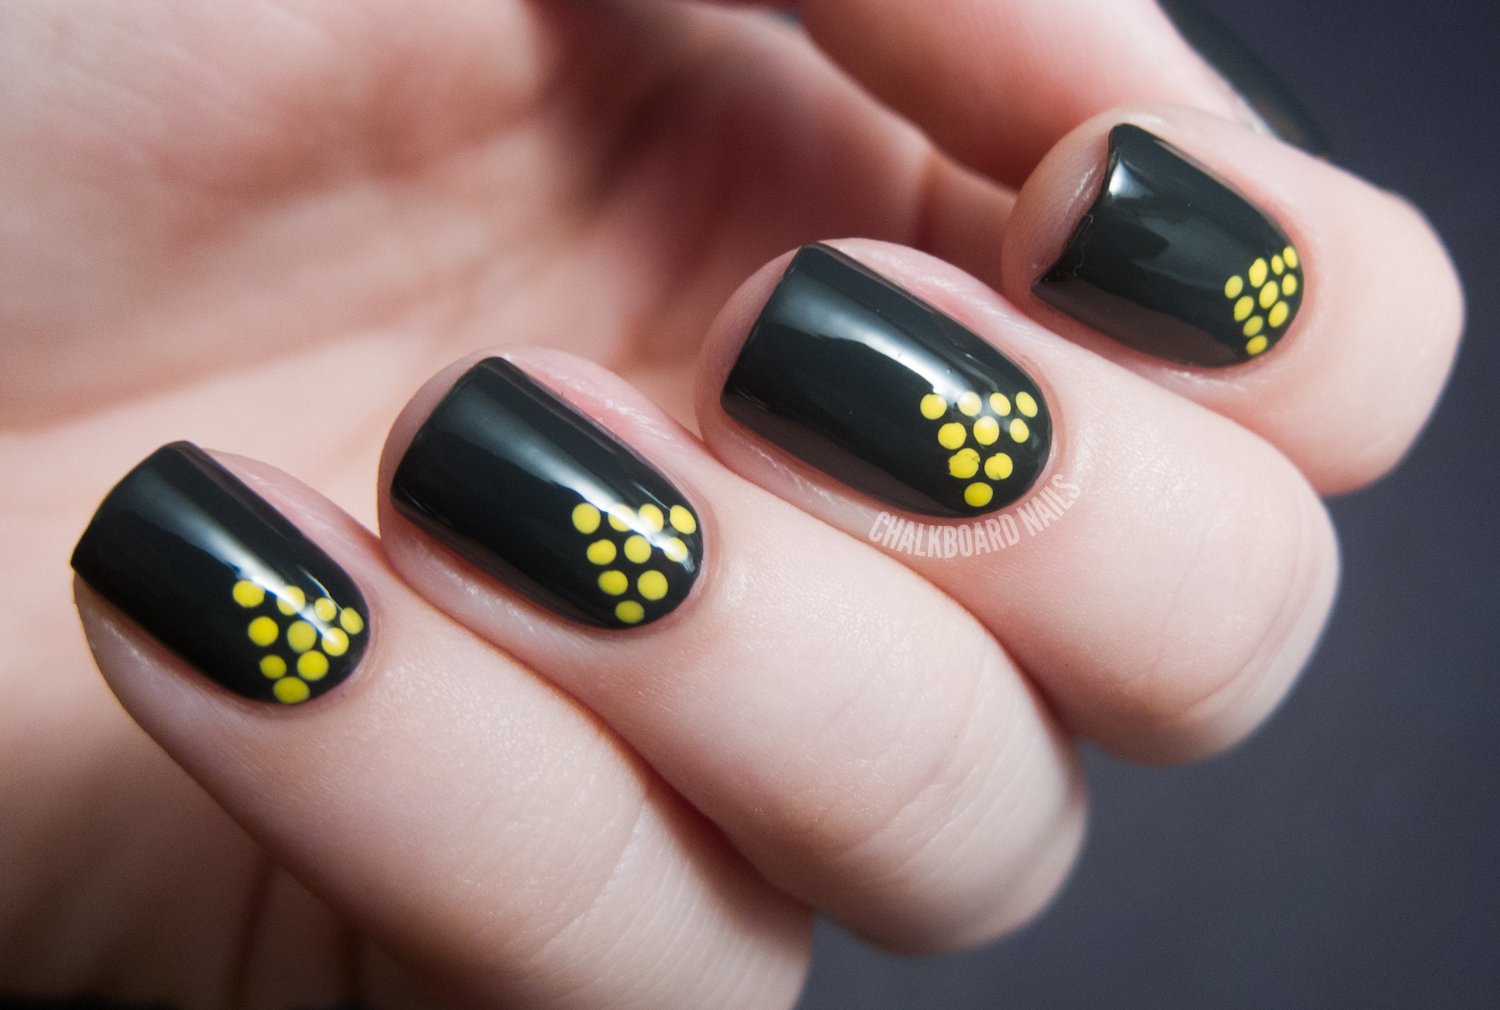 8. Square Birthday Nails with Polka Dots - wide 4